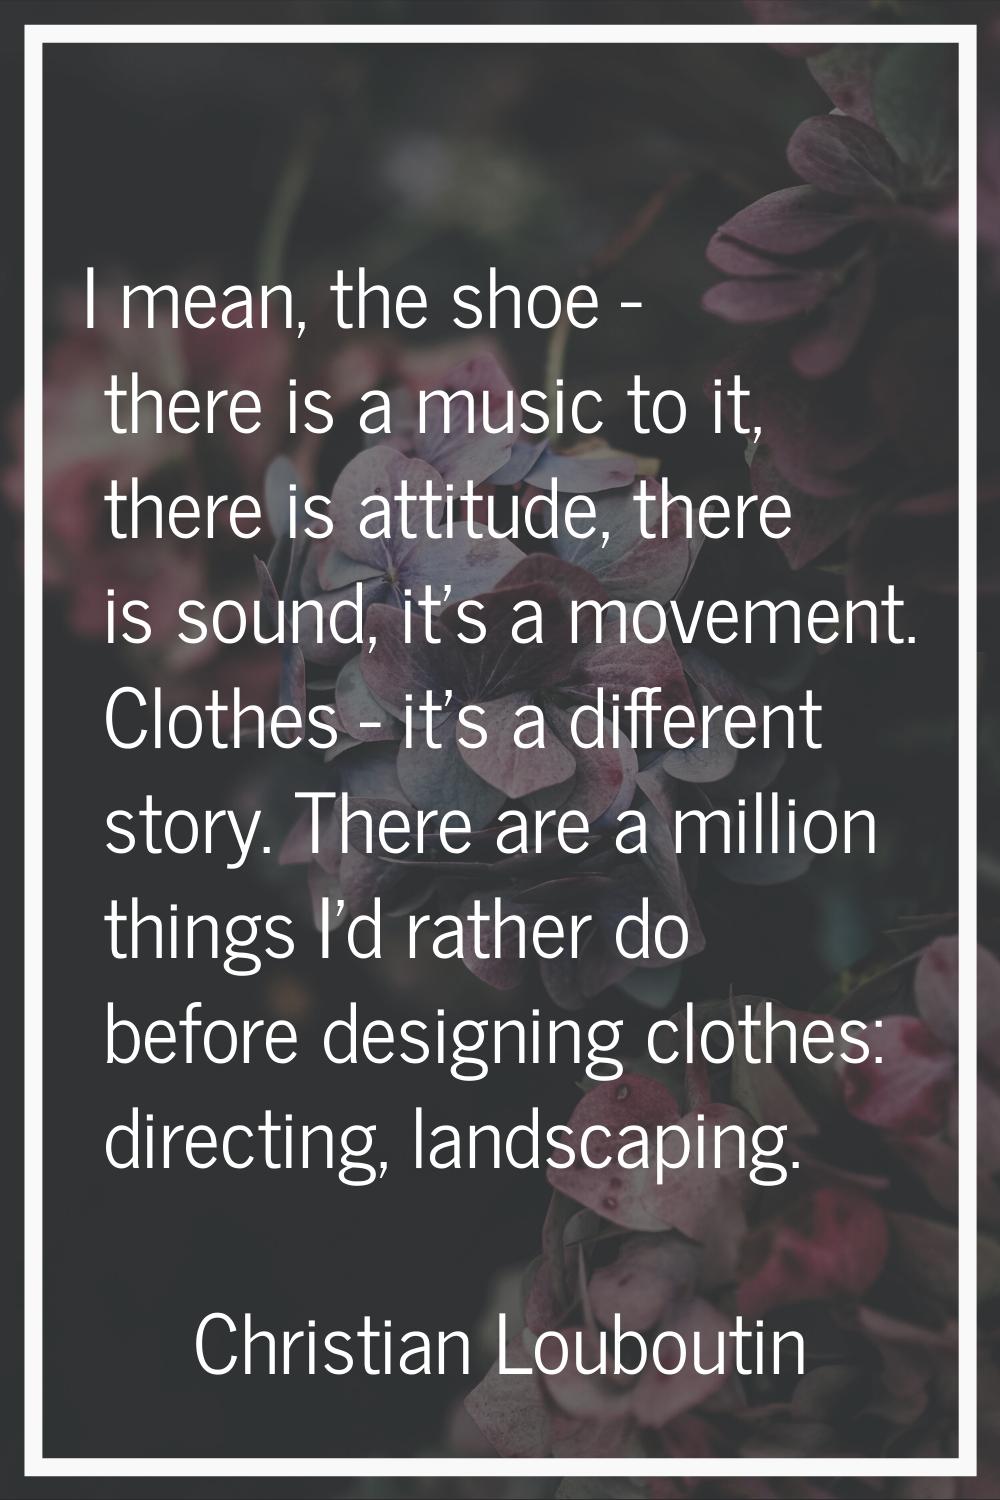 I mean, the shoe - there is a music to it, there is attitude, there is sound, it's a movement. Clot